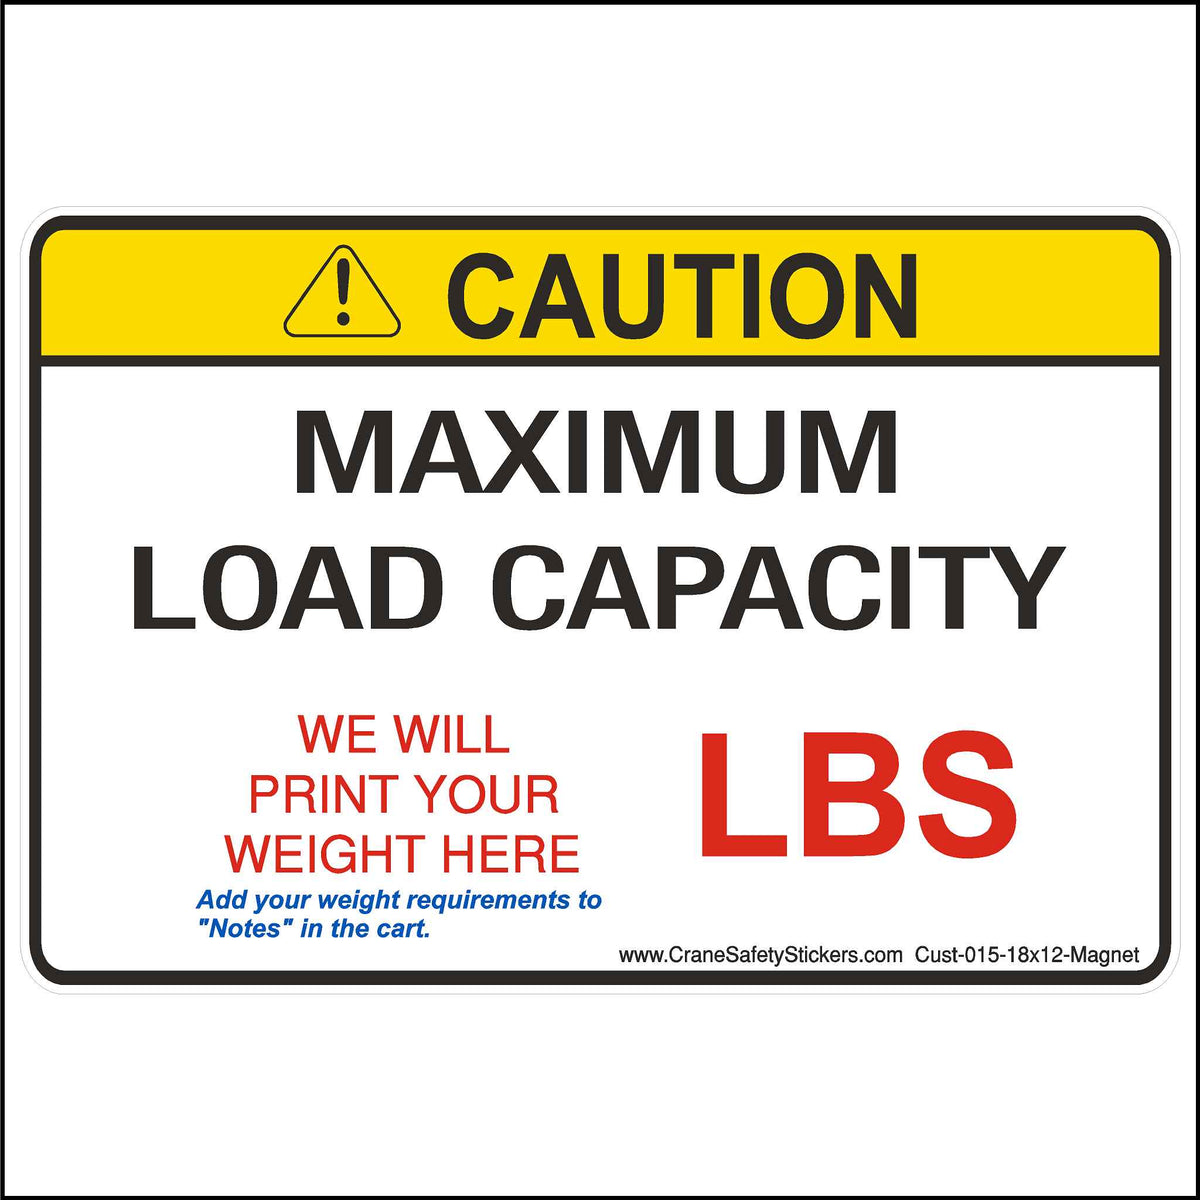 We Print With Your Weight Requirements On This Maximum Load Capacity Sign